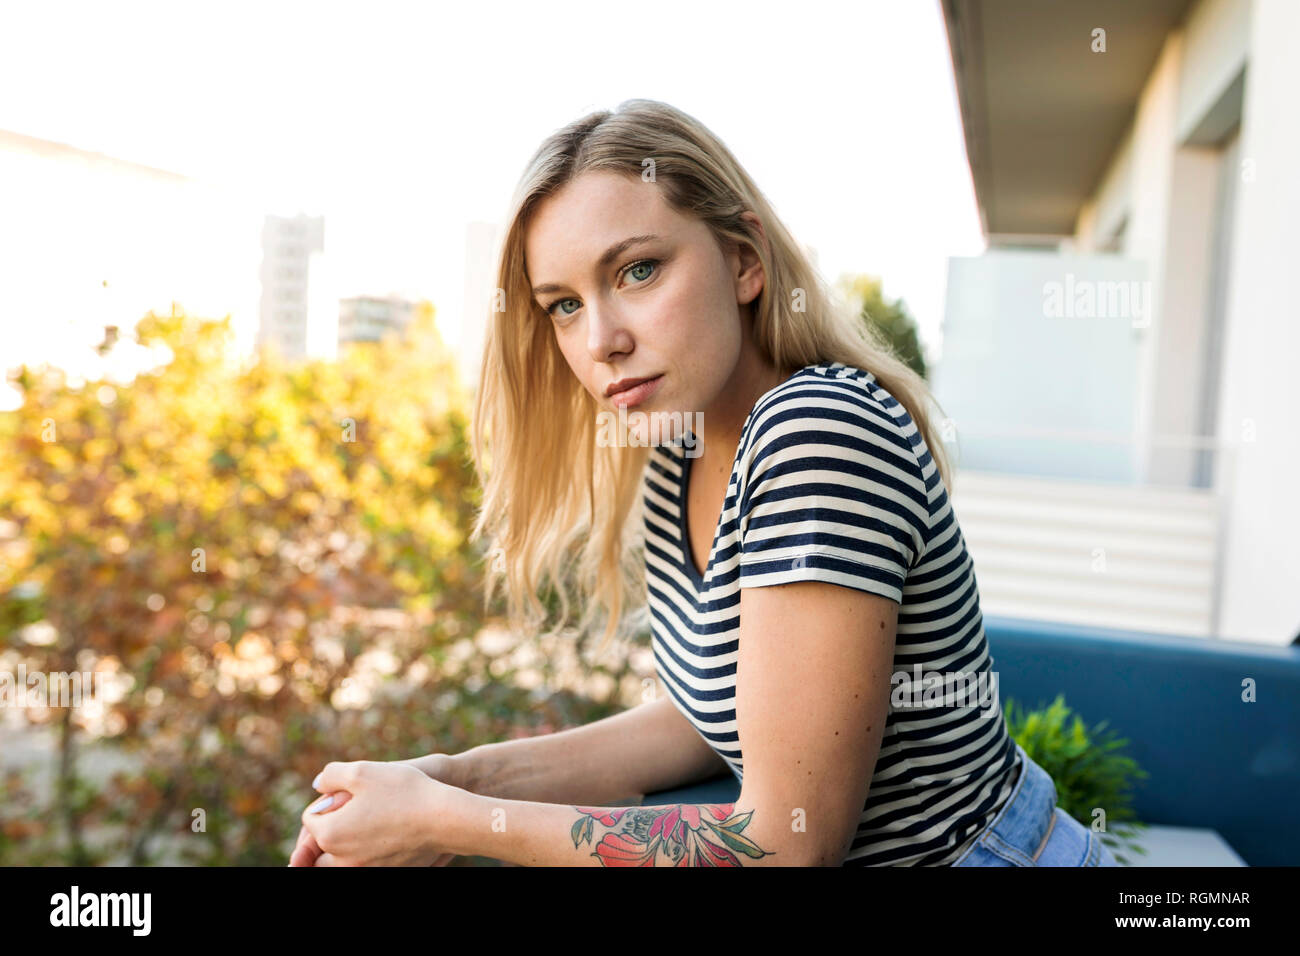 Portrait of blond young woman on balcony Stock Photo